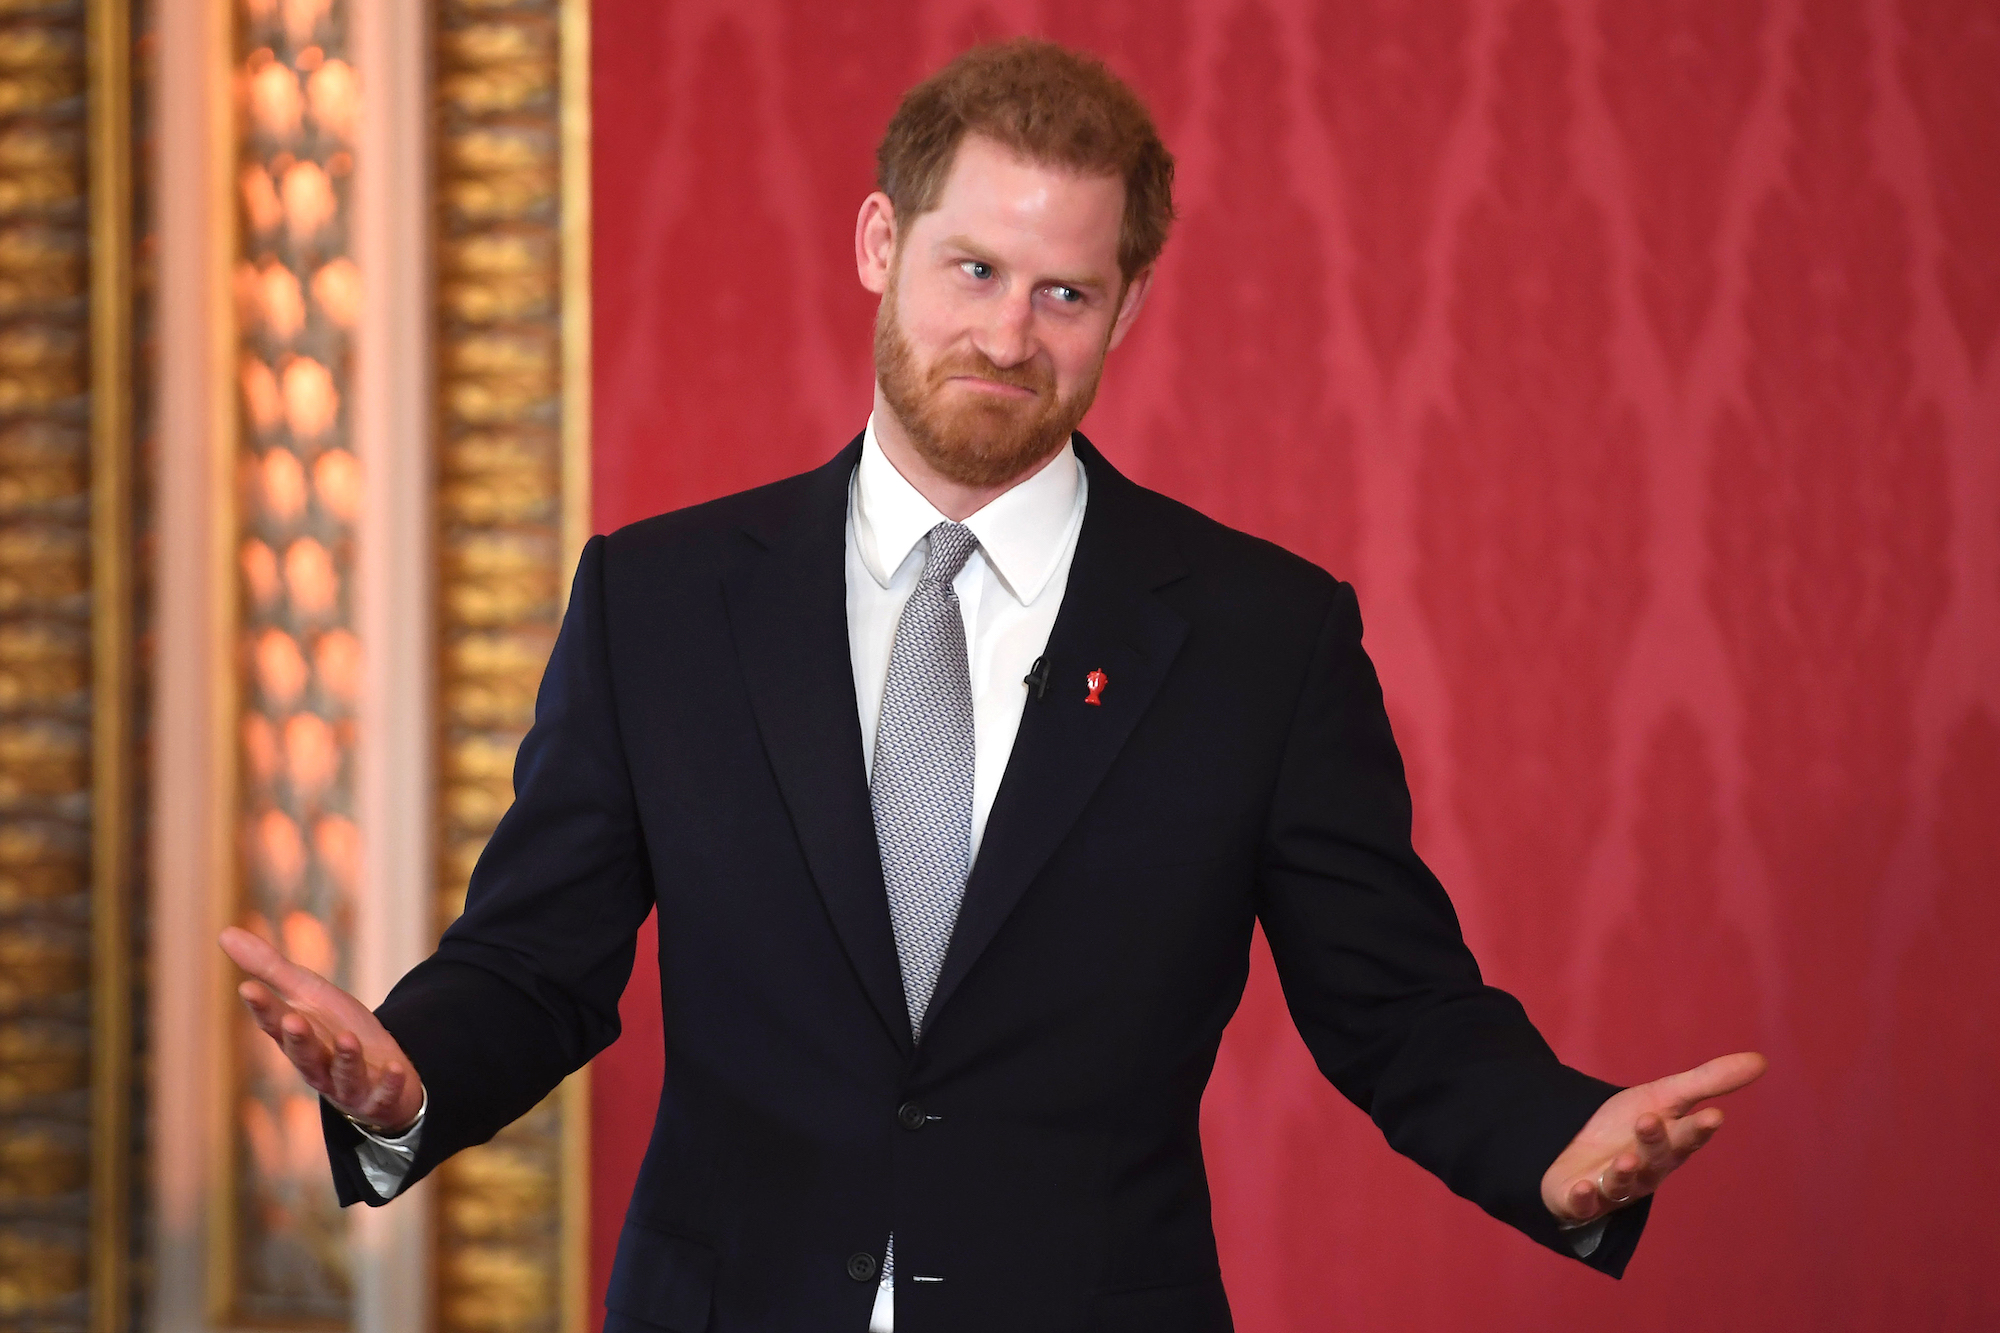 Prince Harry shrugging with a humorous frown